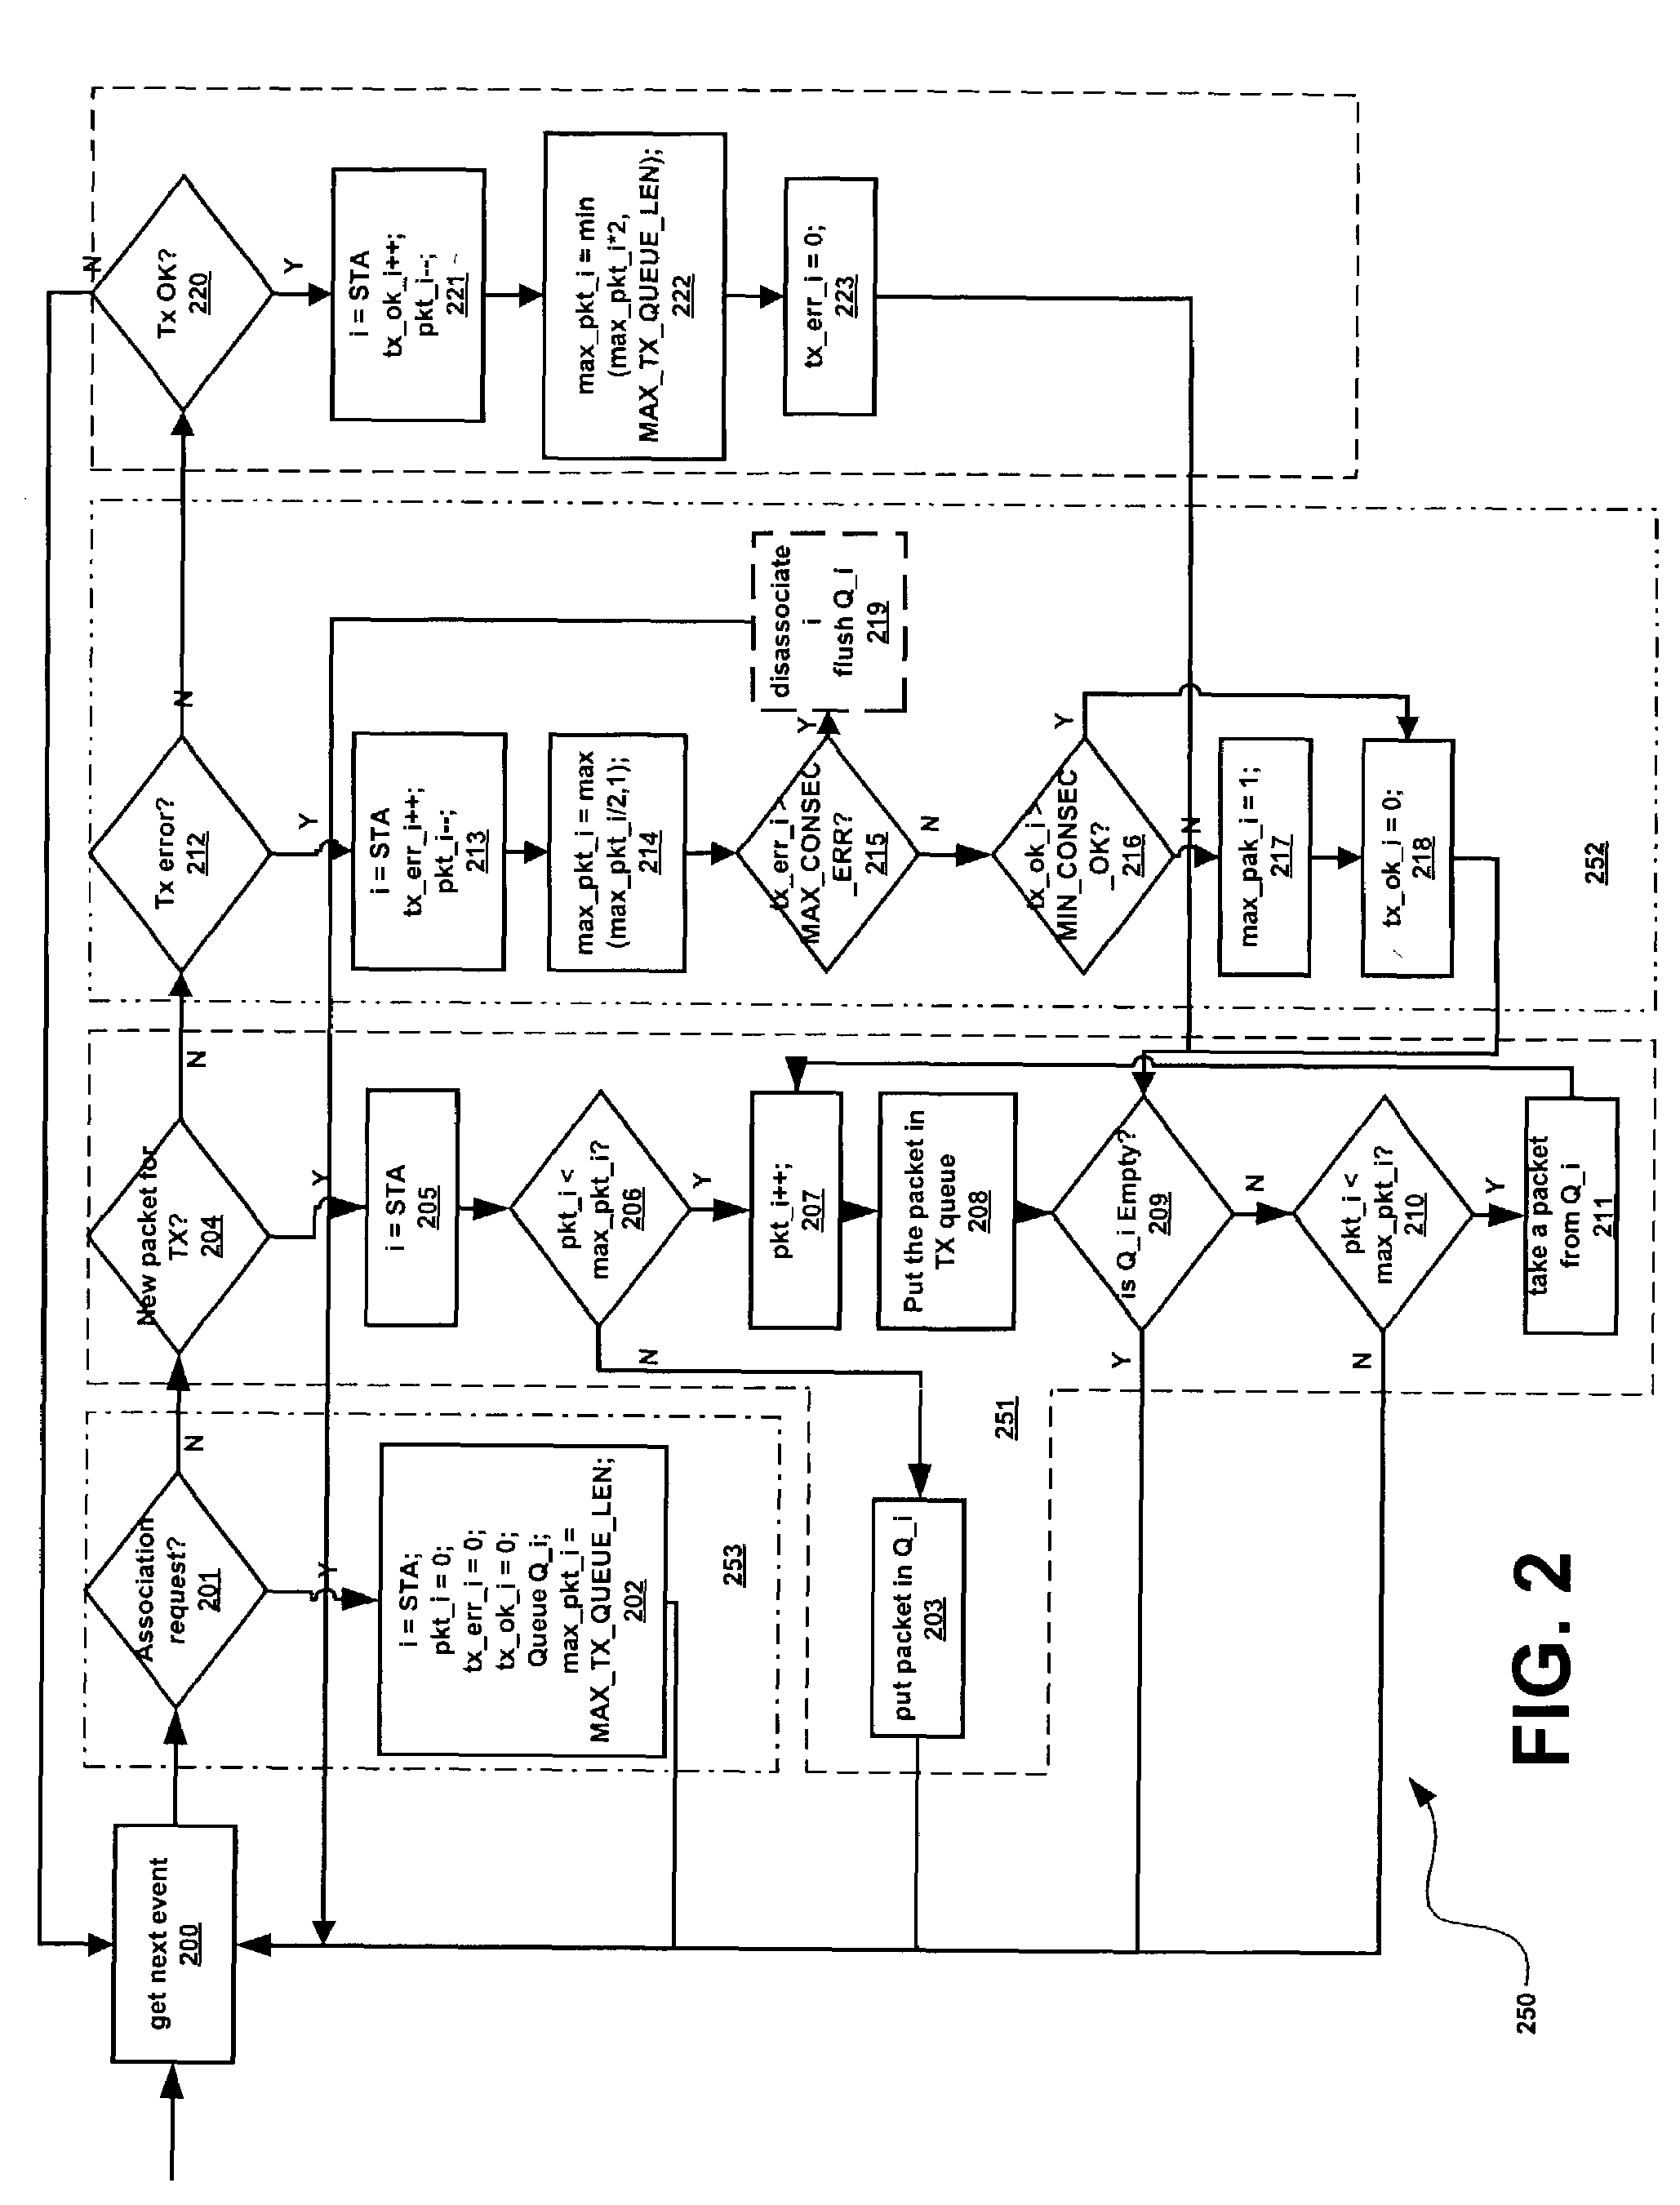 System and method for an IEEE 802.11 access point to prevent traffic suffering bad link quality from affecting other traffic